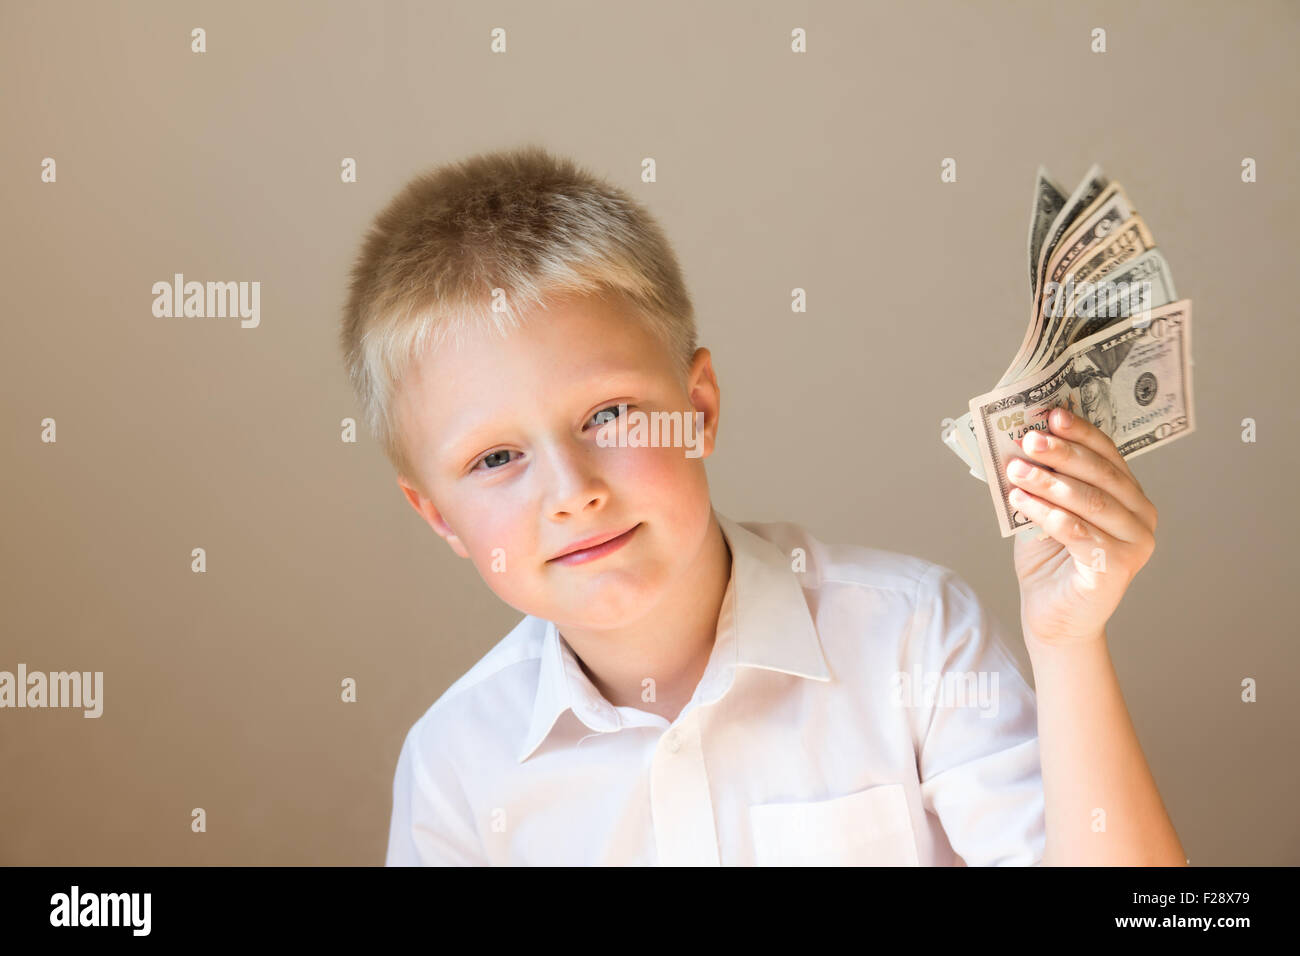 Happy smiling child with money (dollars) in hand on gray background Stock Photo